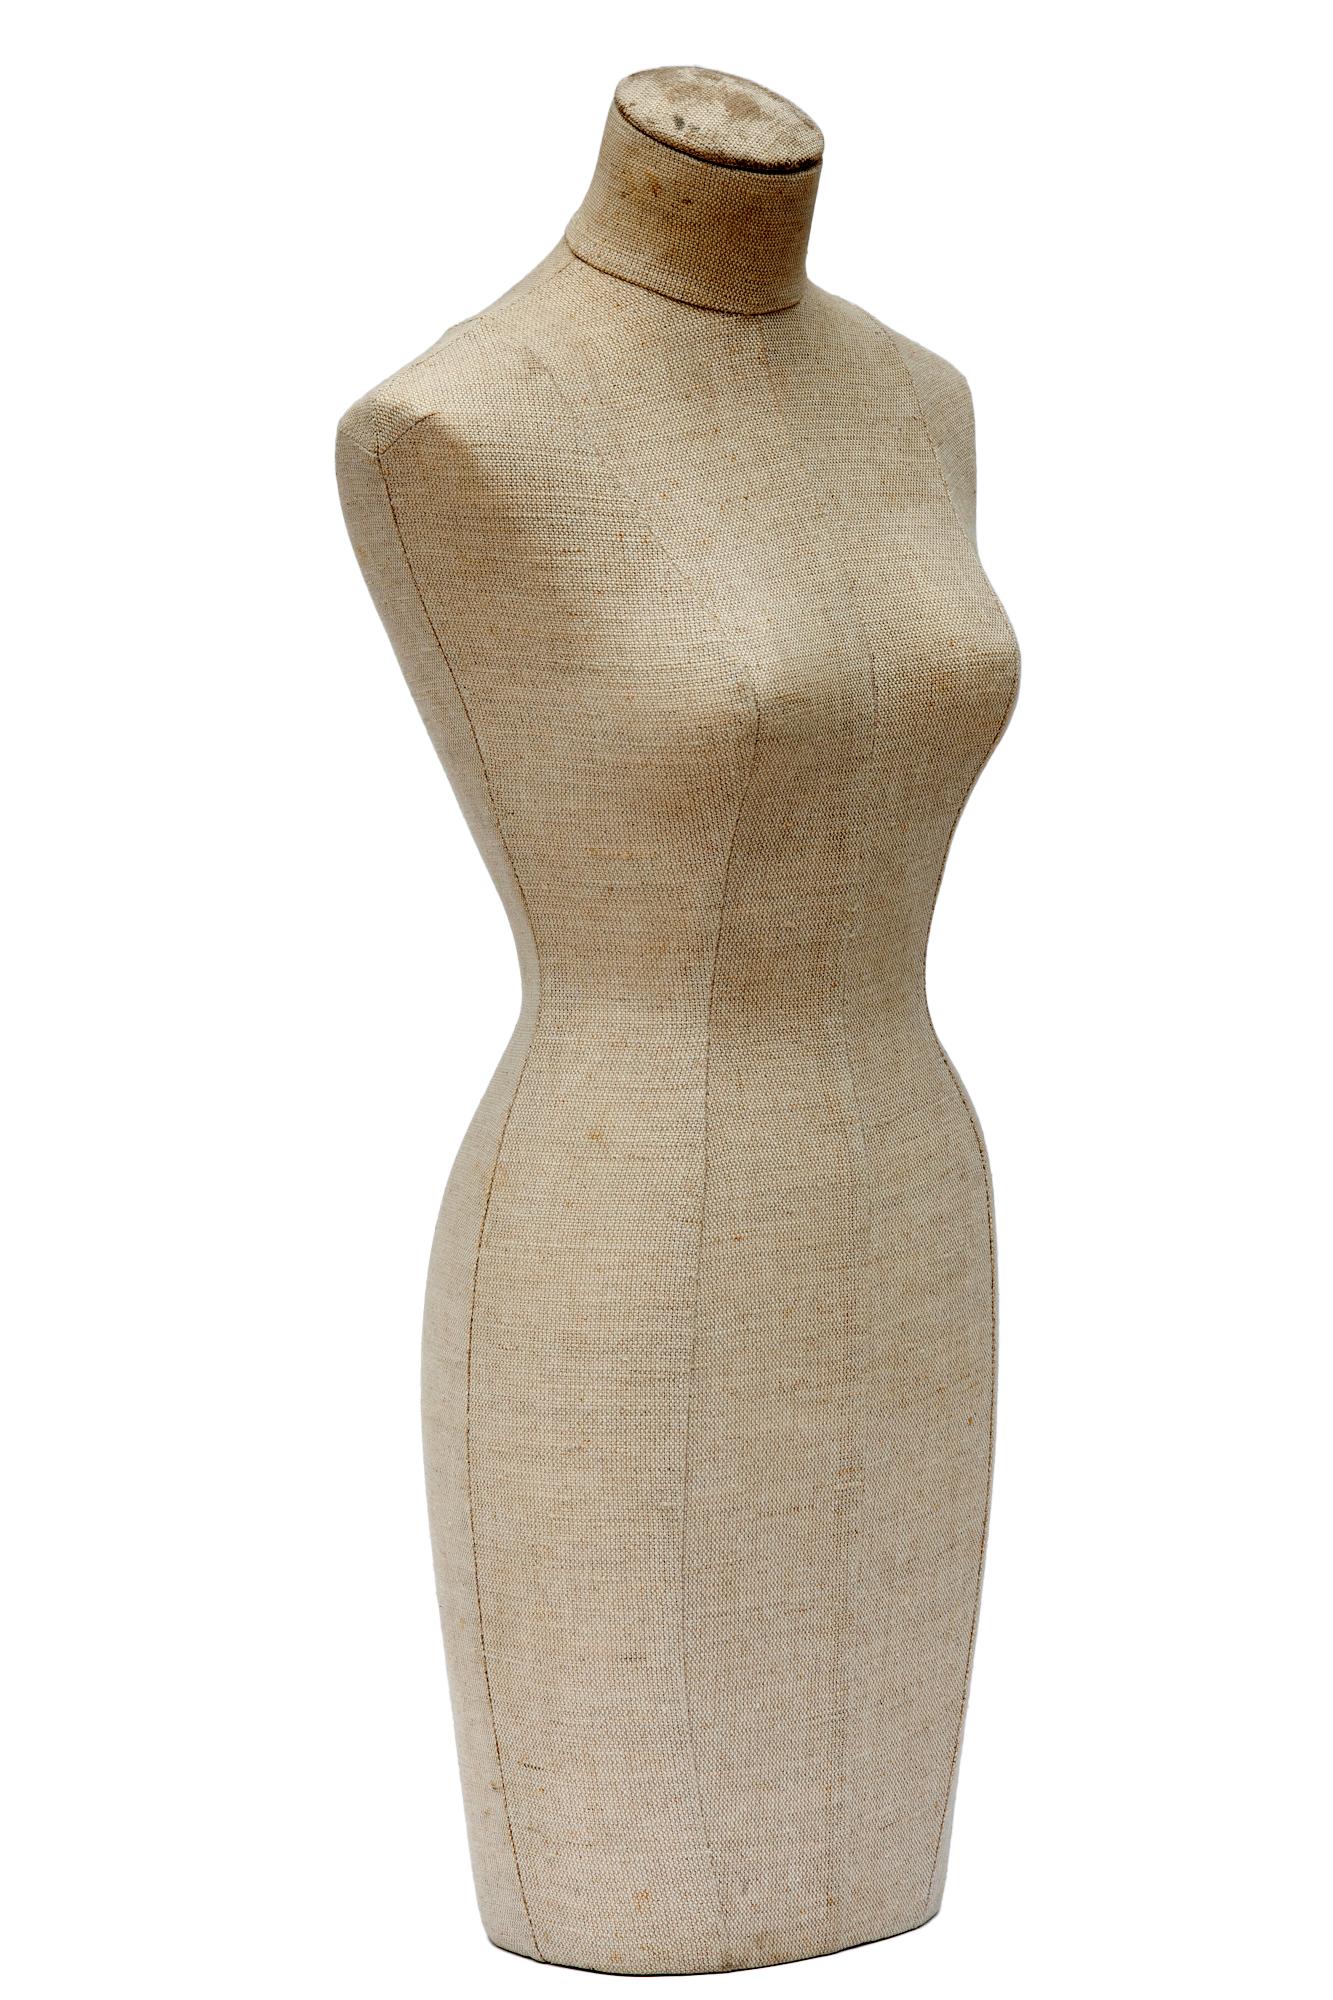 Designer's jewelry mannequin wrapped in Belgian linen over hardwood. Interior mechanism to place on a stand.